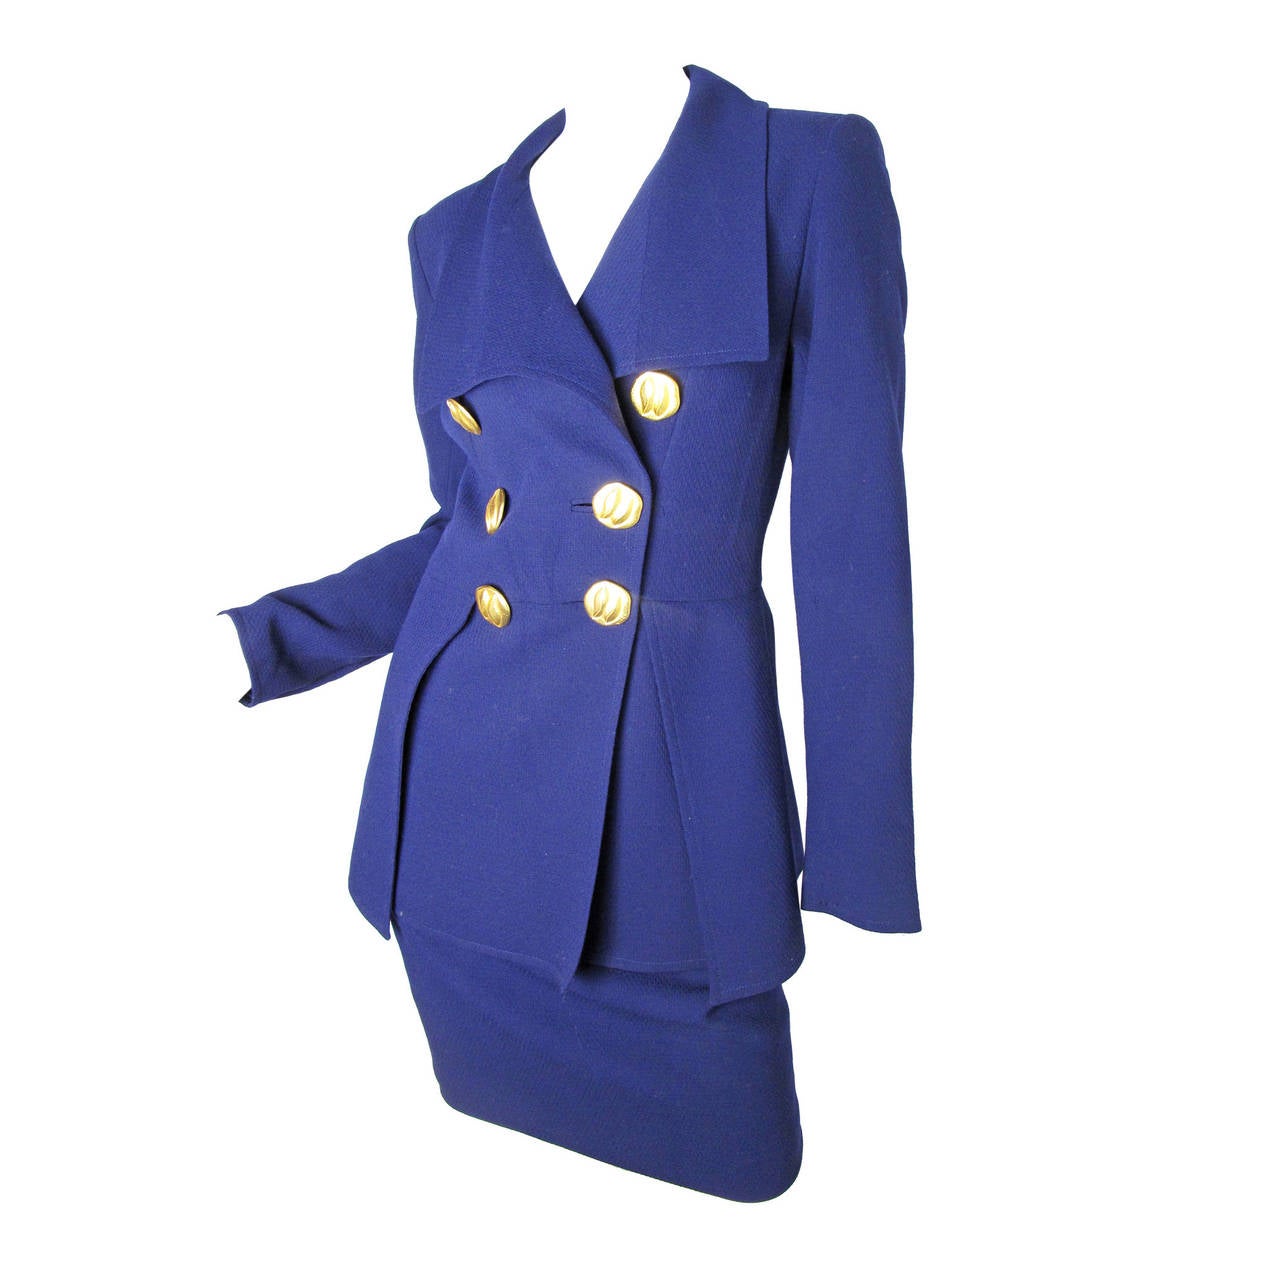 Christian Lacroix Suit with Large Metal Buttons